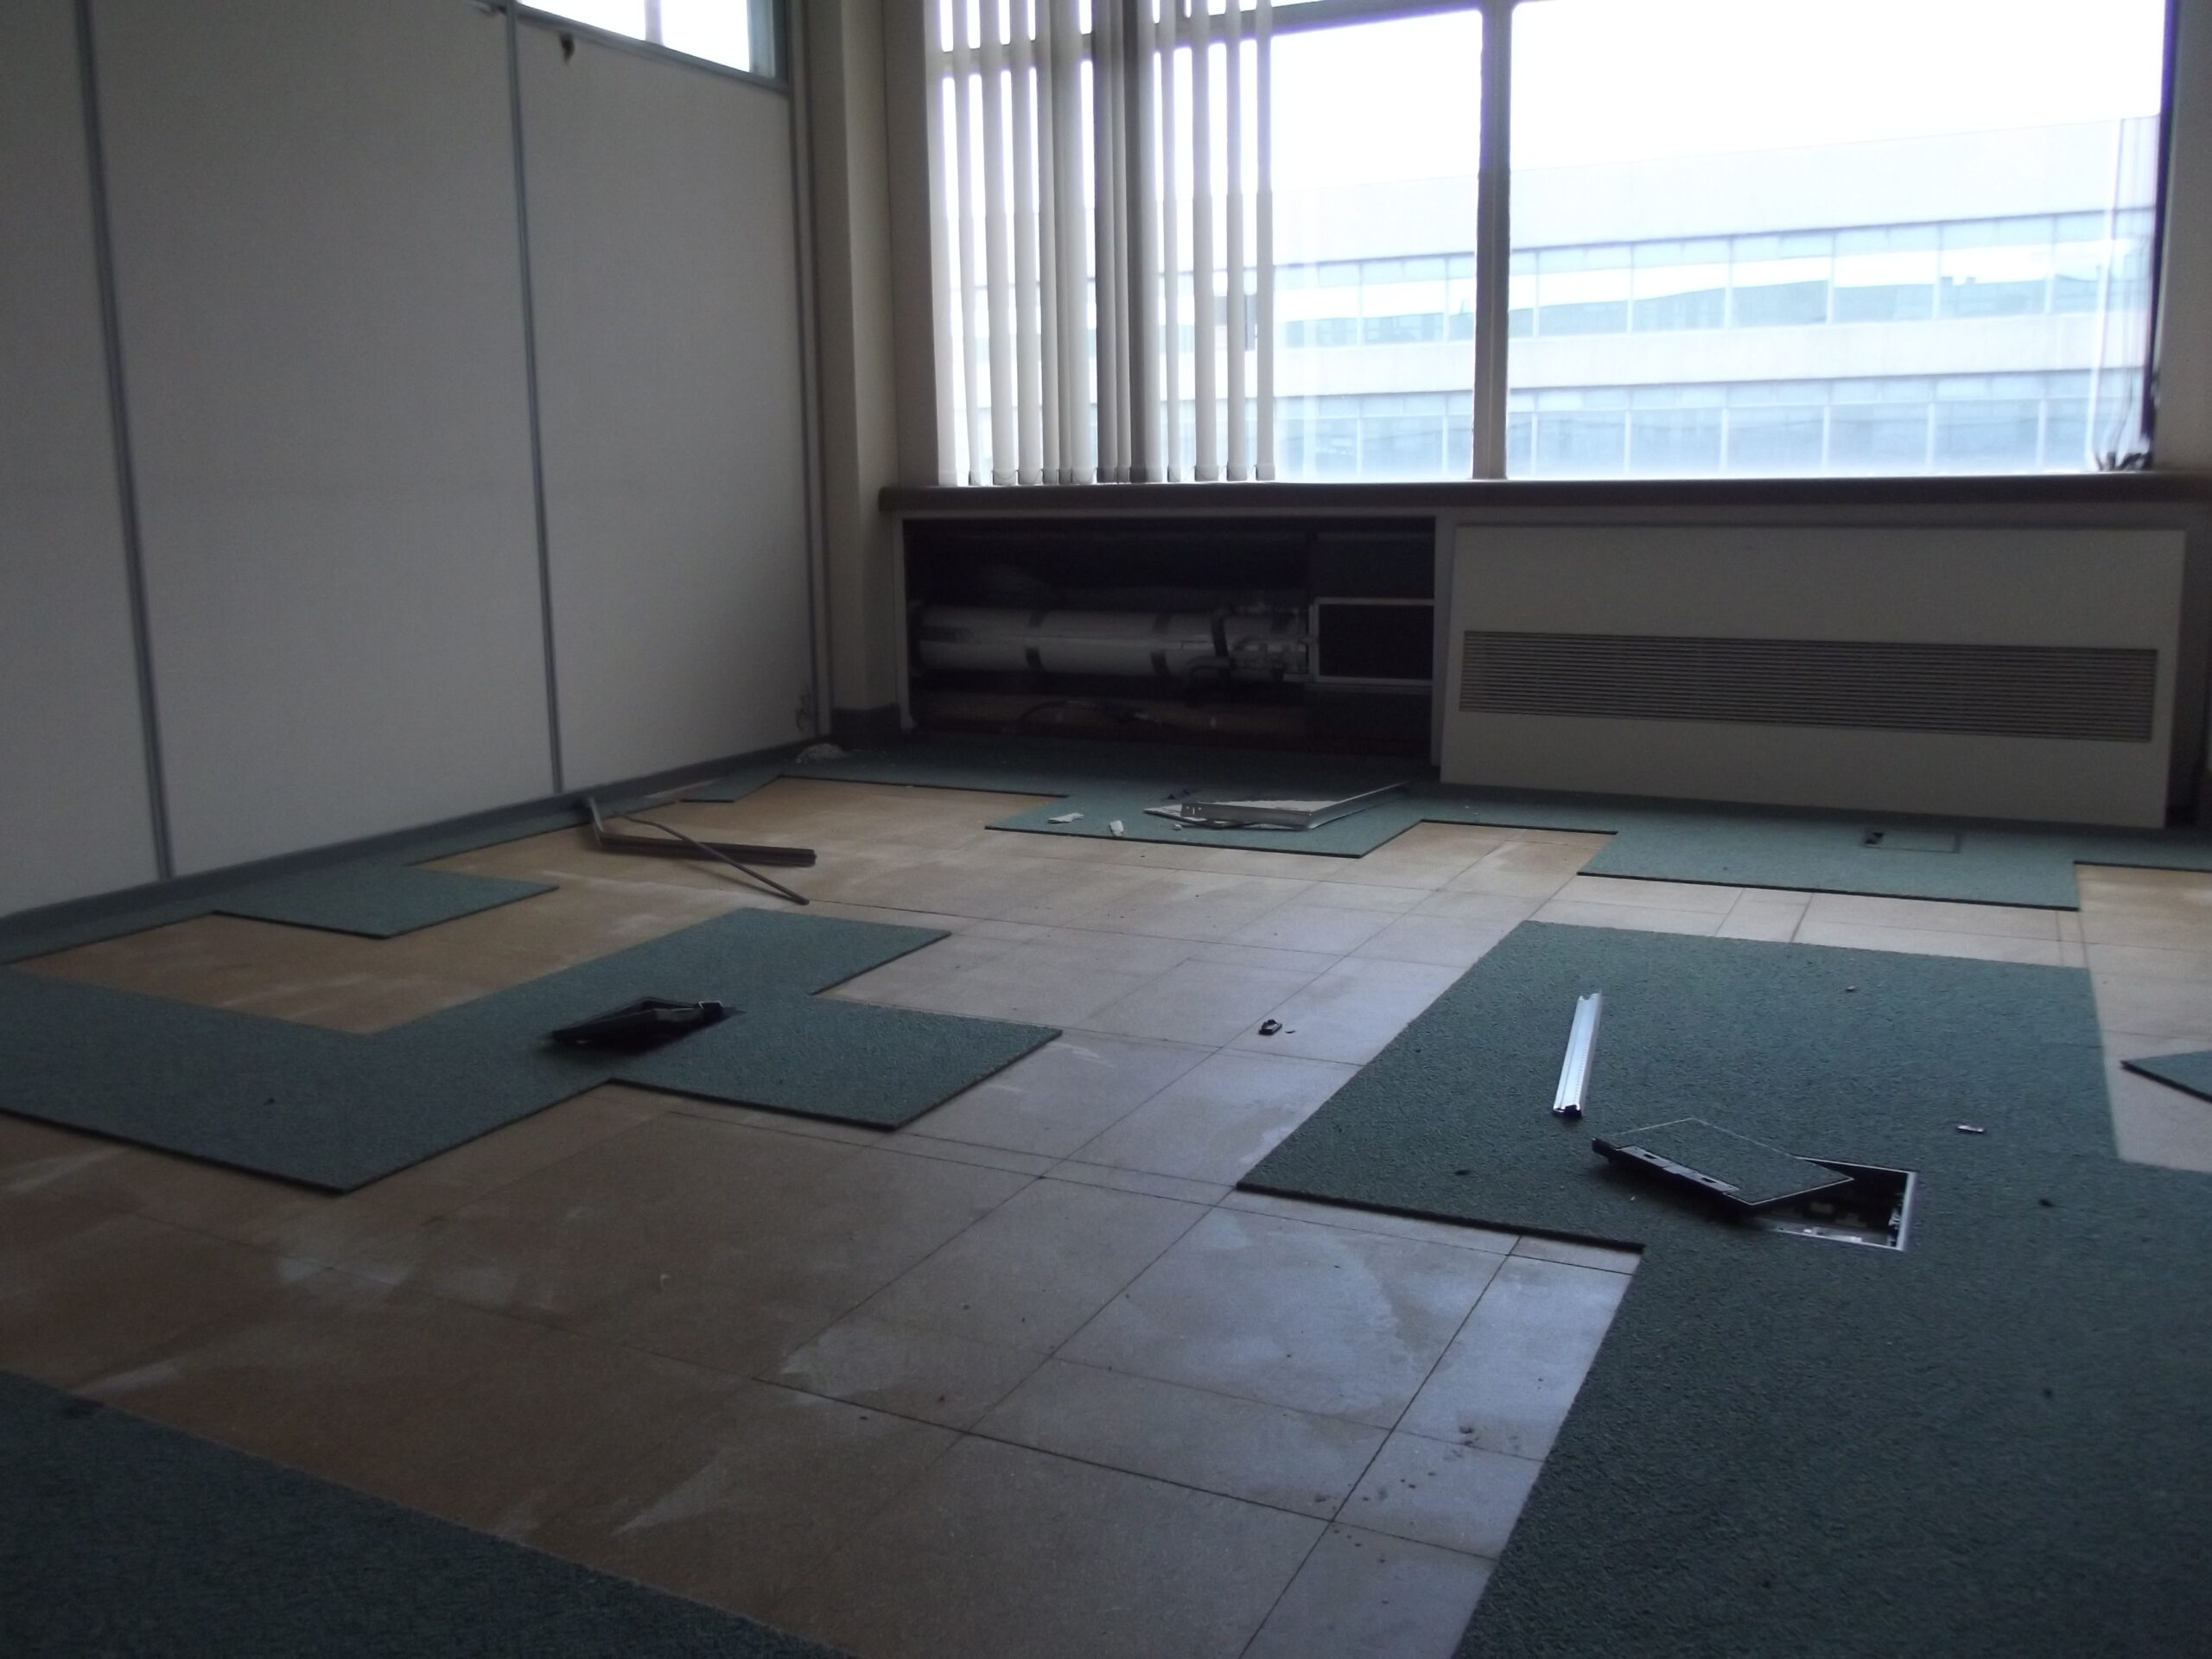 C506, removal of carpet tiles